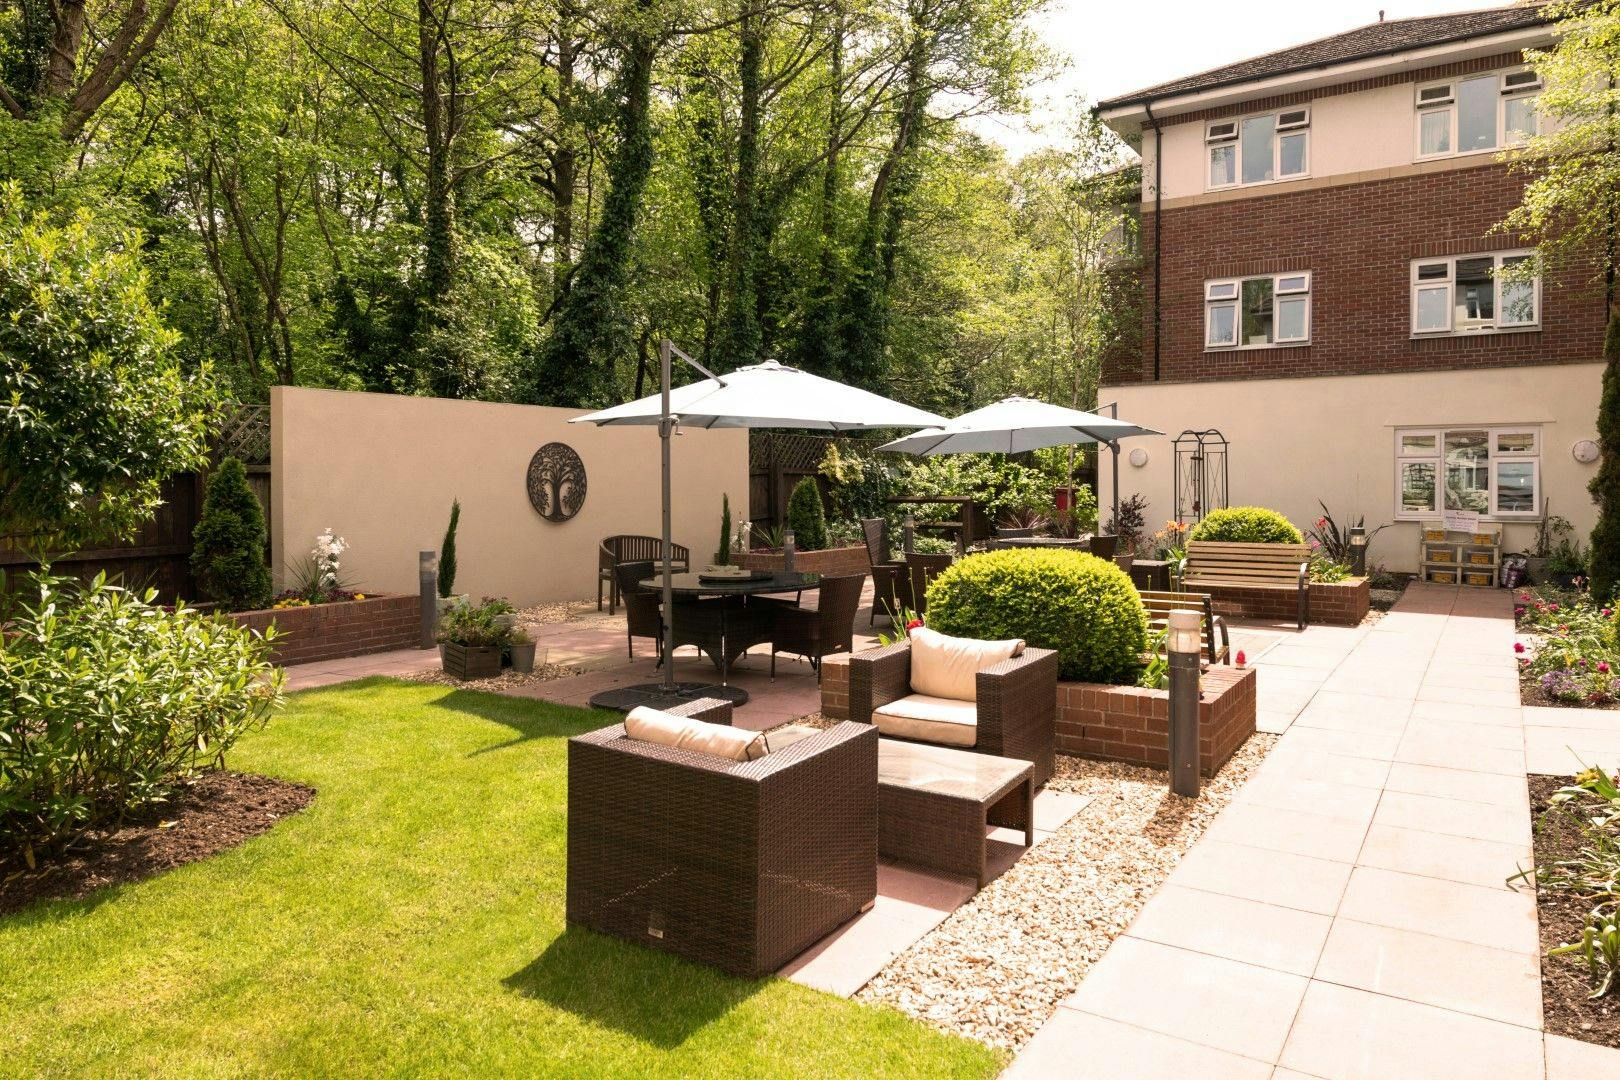 Garden at Ty Enfys Care Home in Cardiff, South Glamorgan